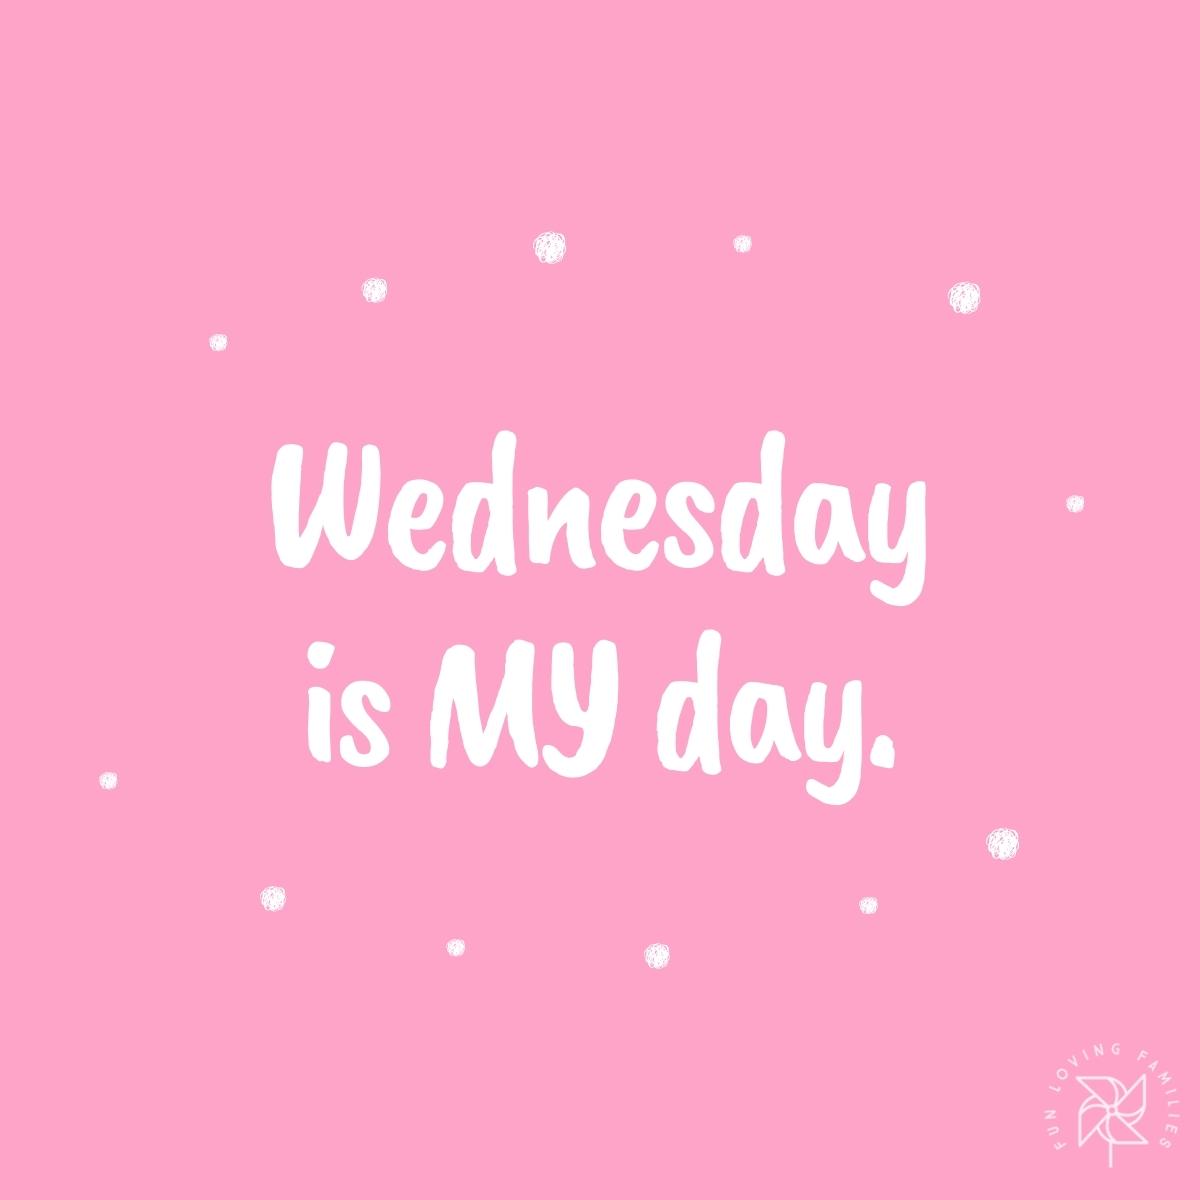 Wednesday is MY day affirmation image